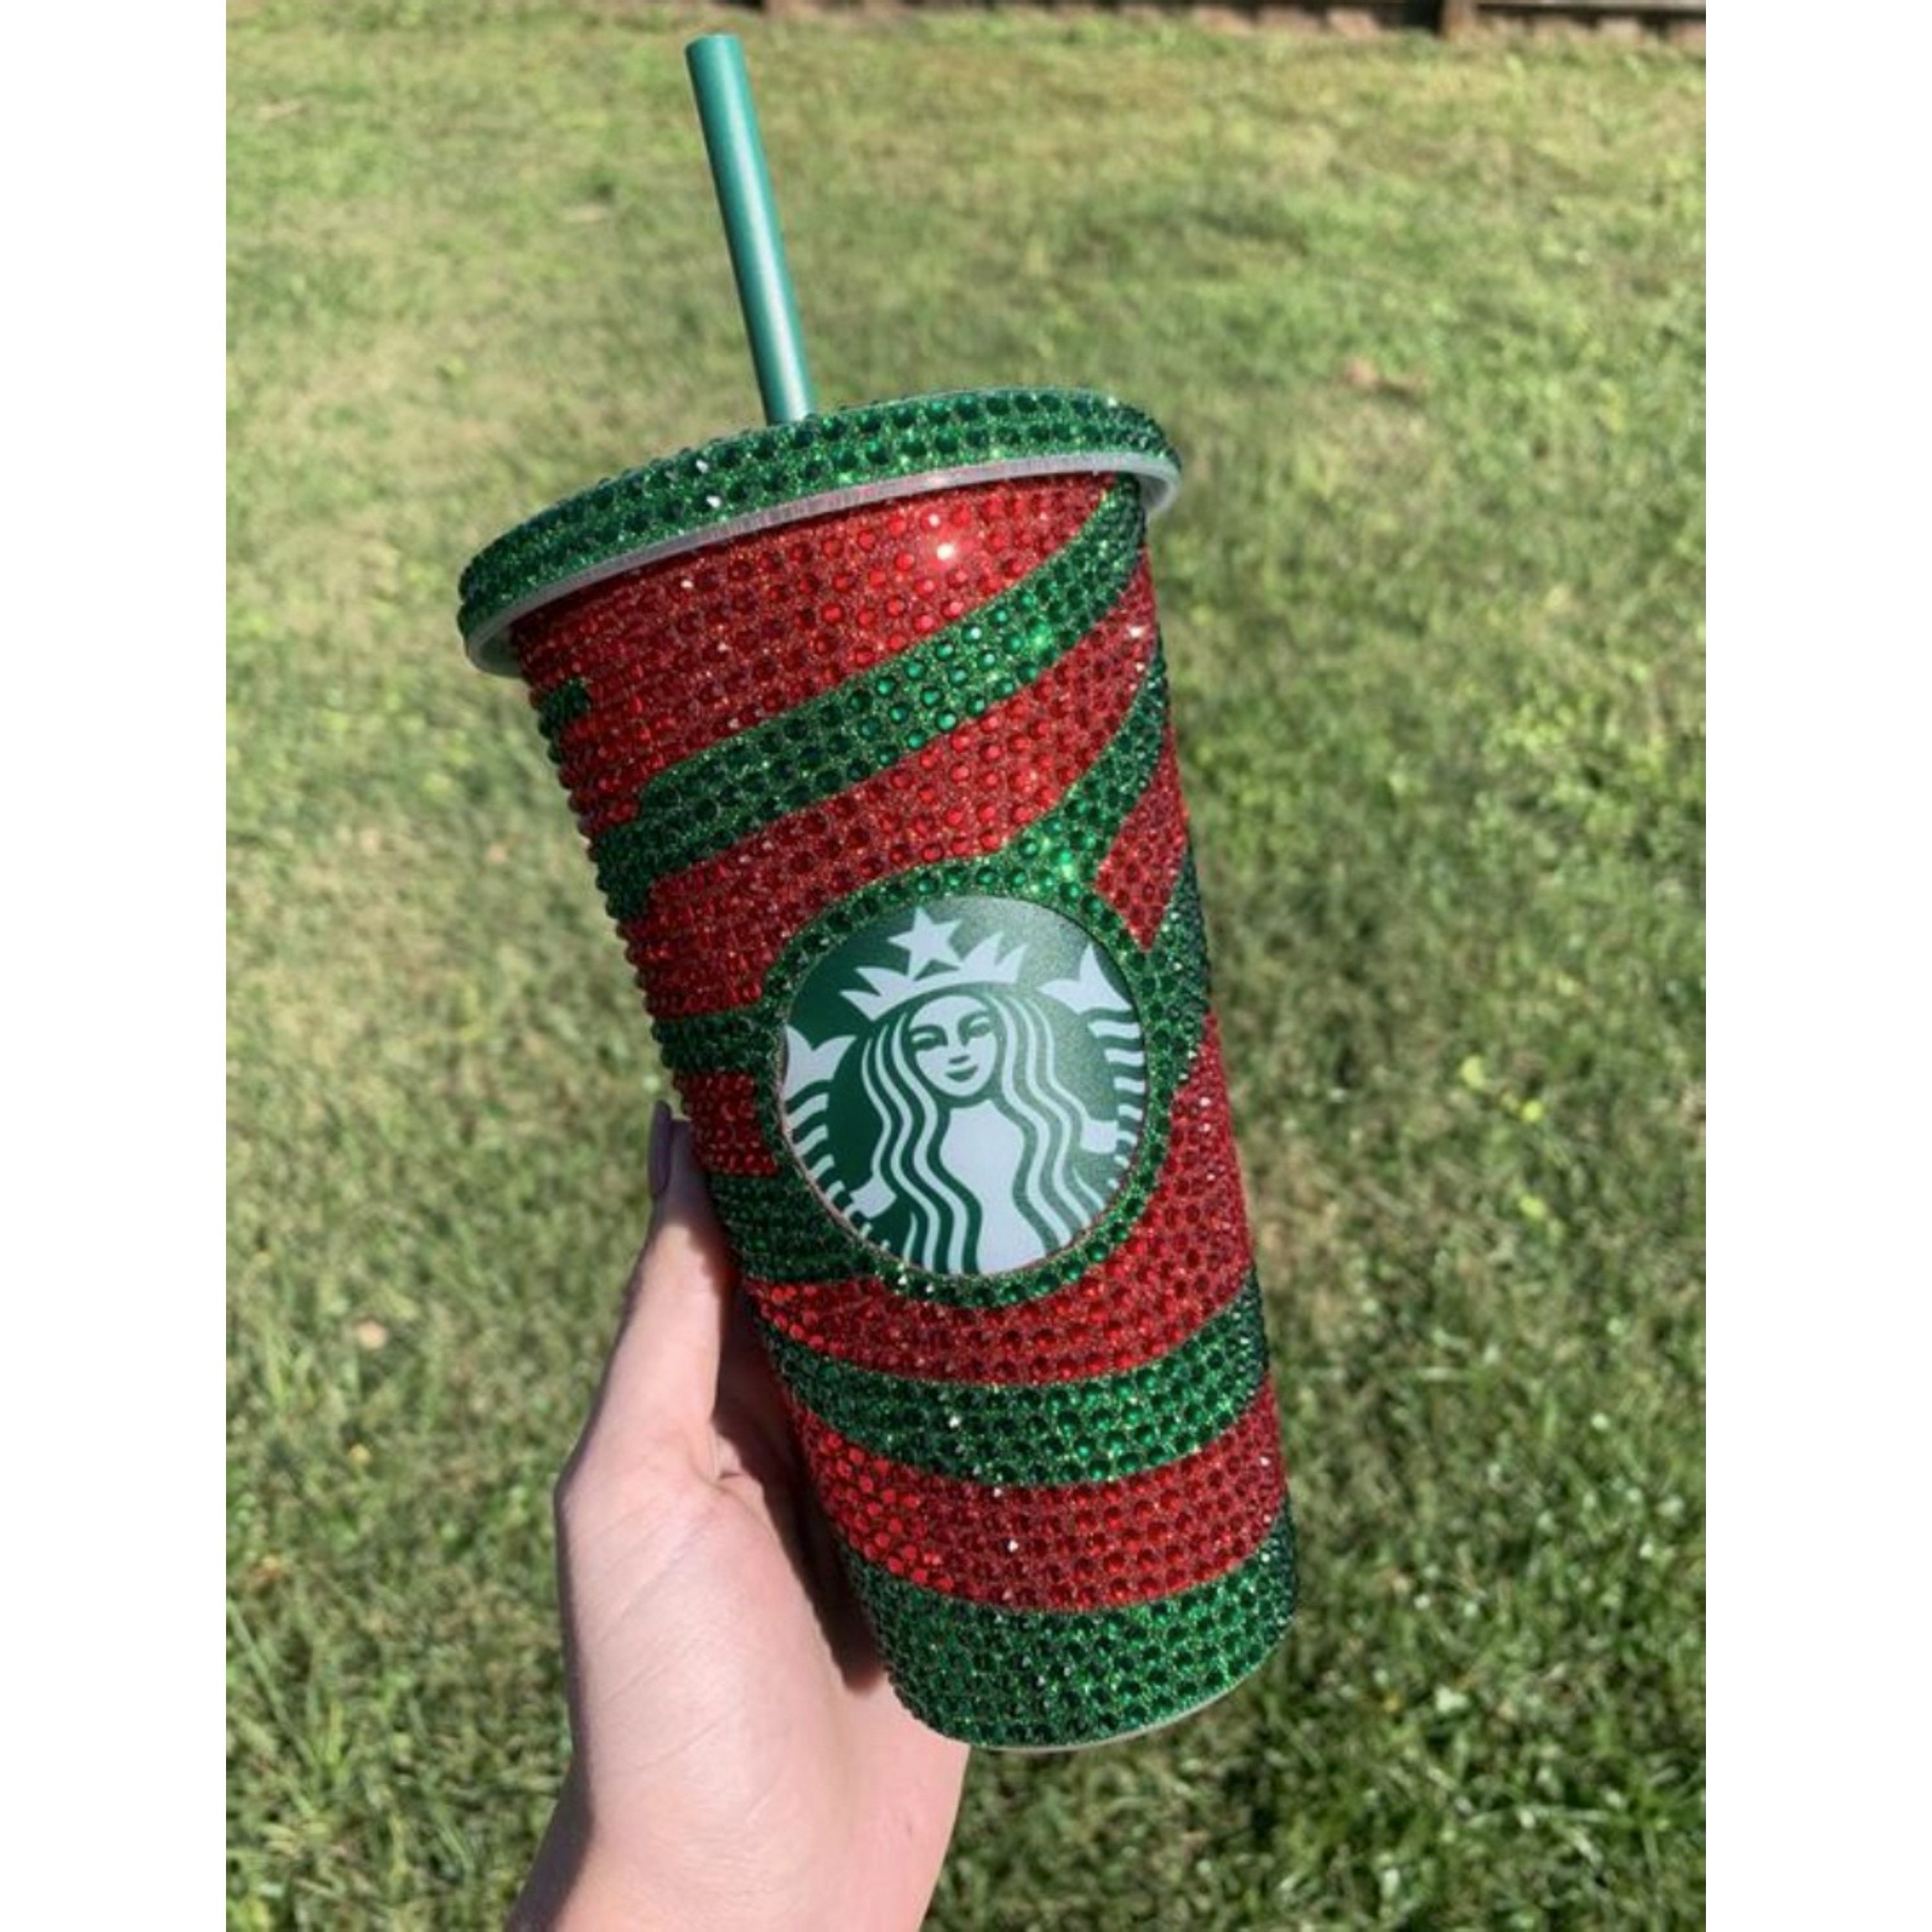 Starbucks Reusable Cold Cup Tumbler with Emerald Green Crystals